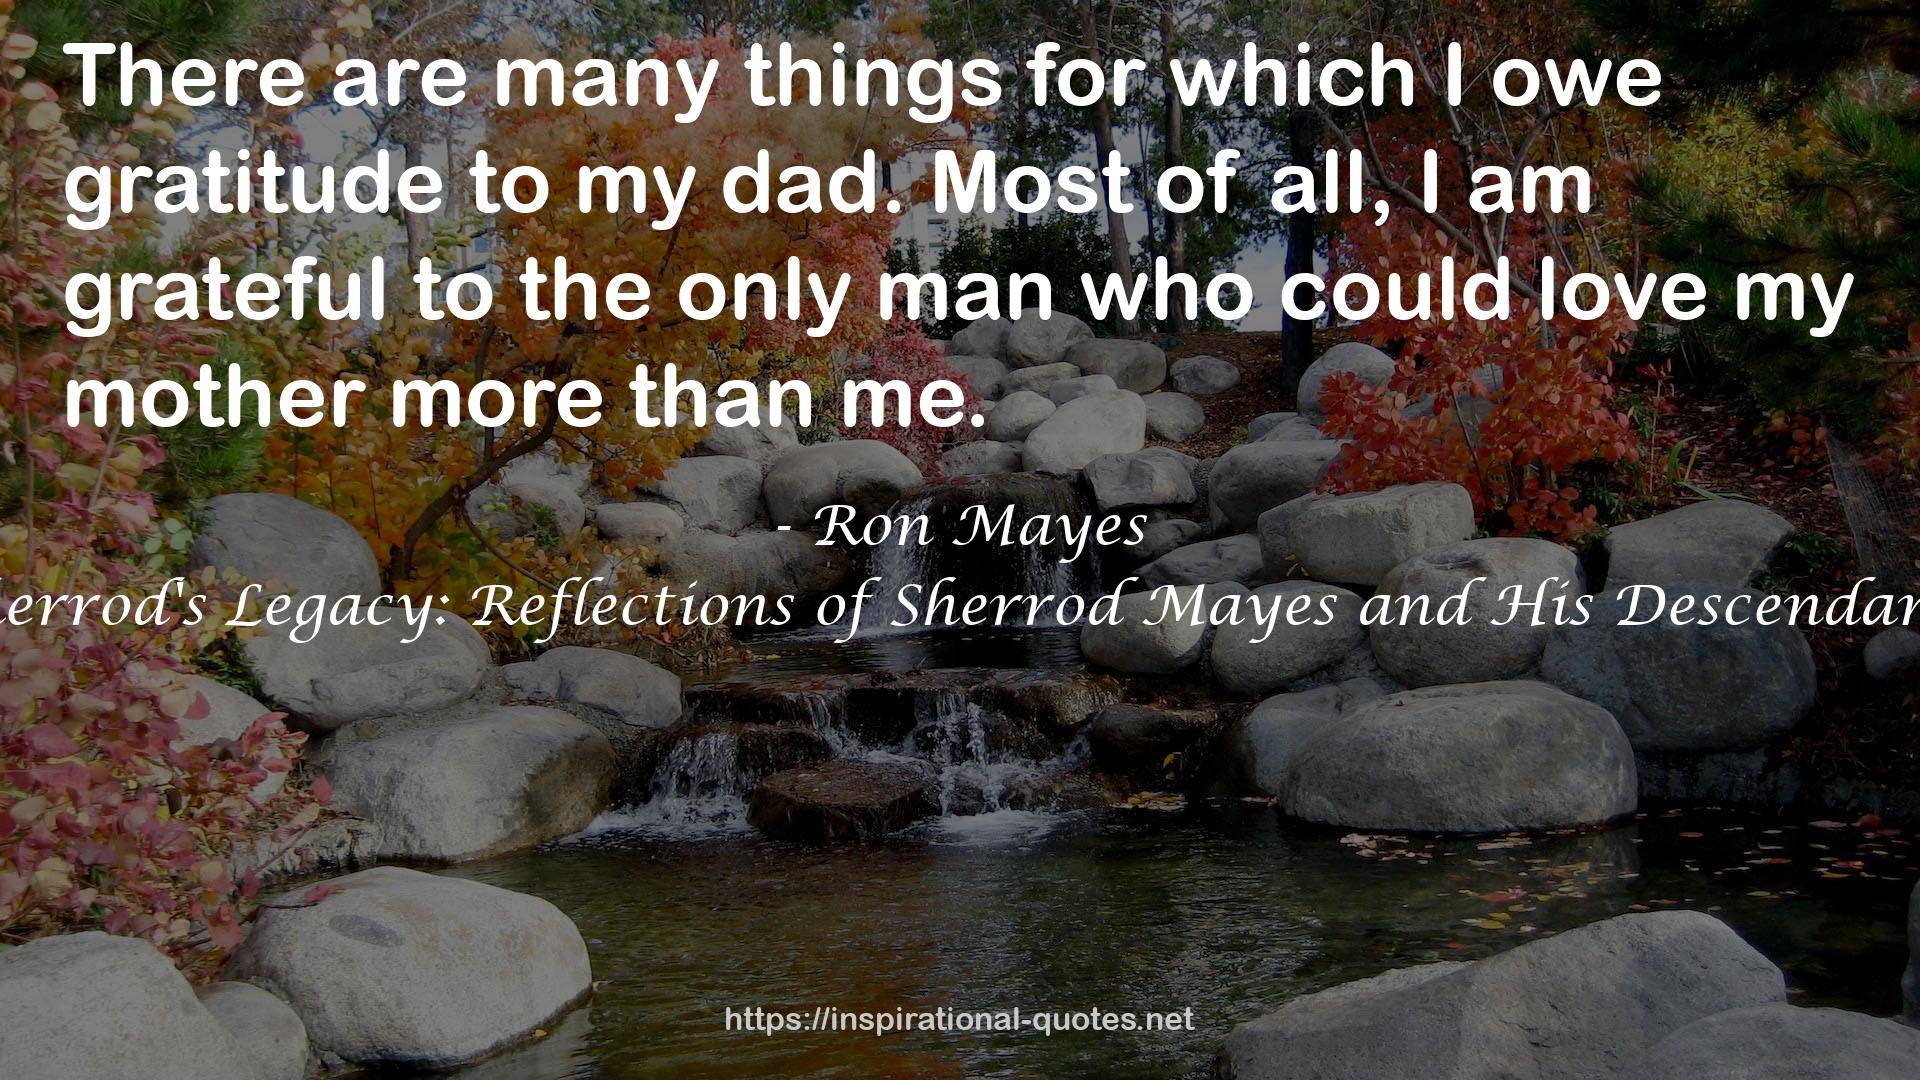 Ron Mayes QUOTES